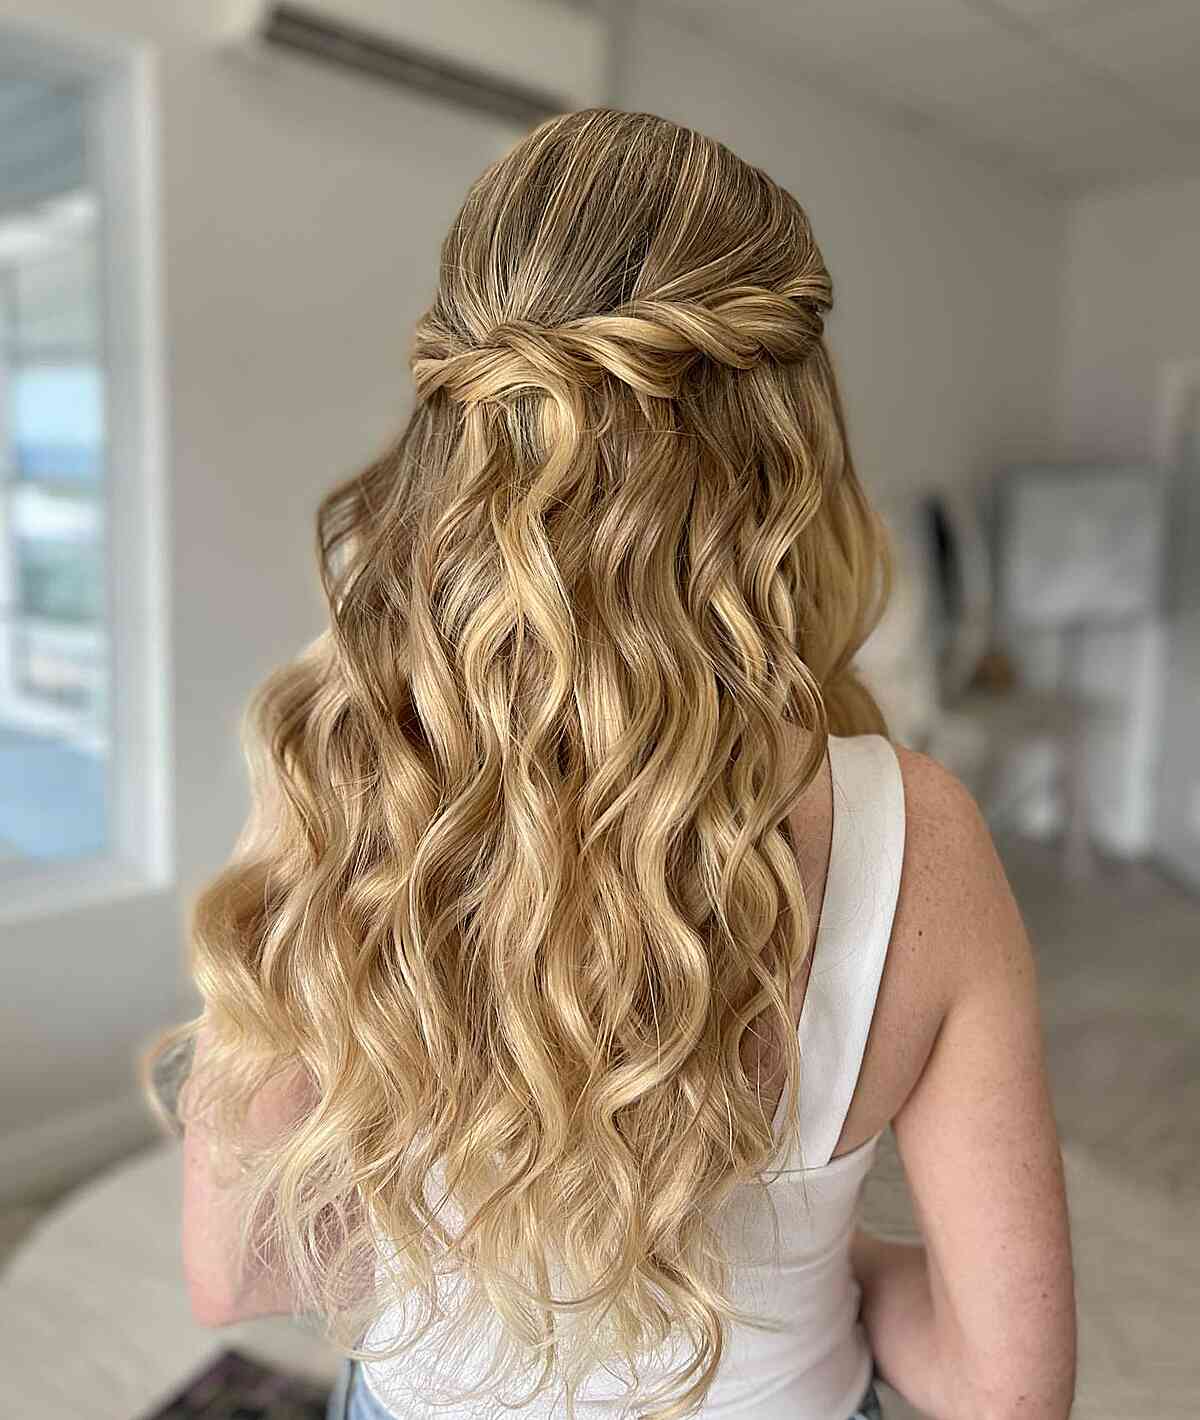 Prom Hairstyles, A Formal Updo | Hairstyles For Girls - Princess Hairstyles